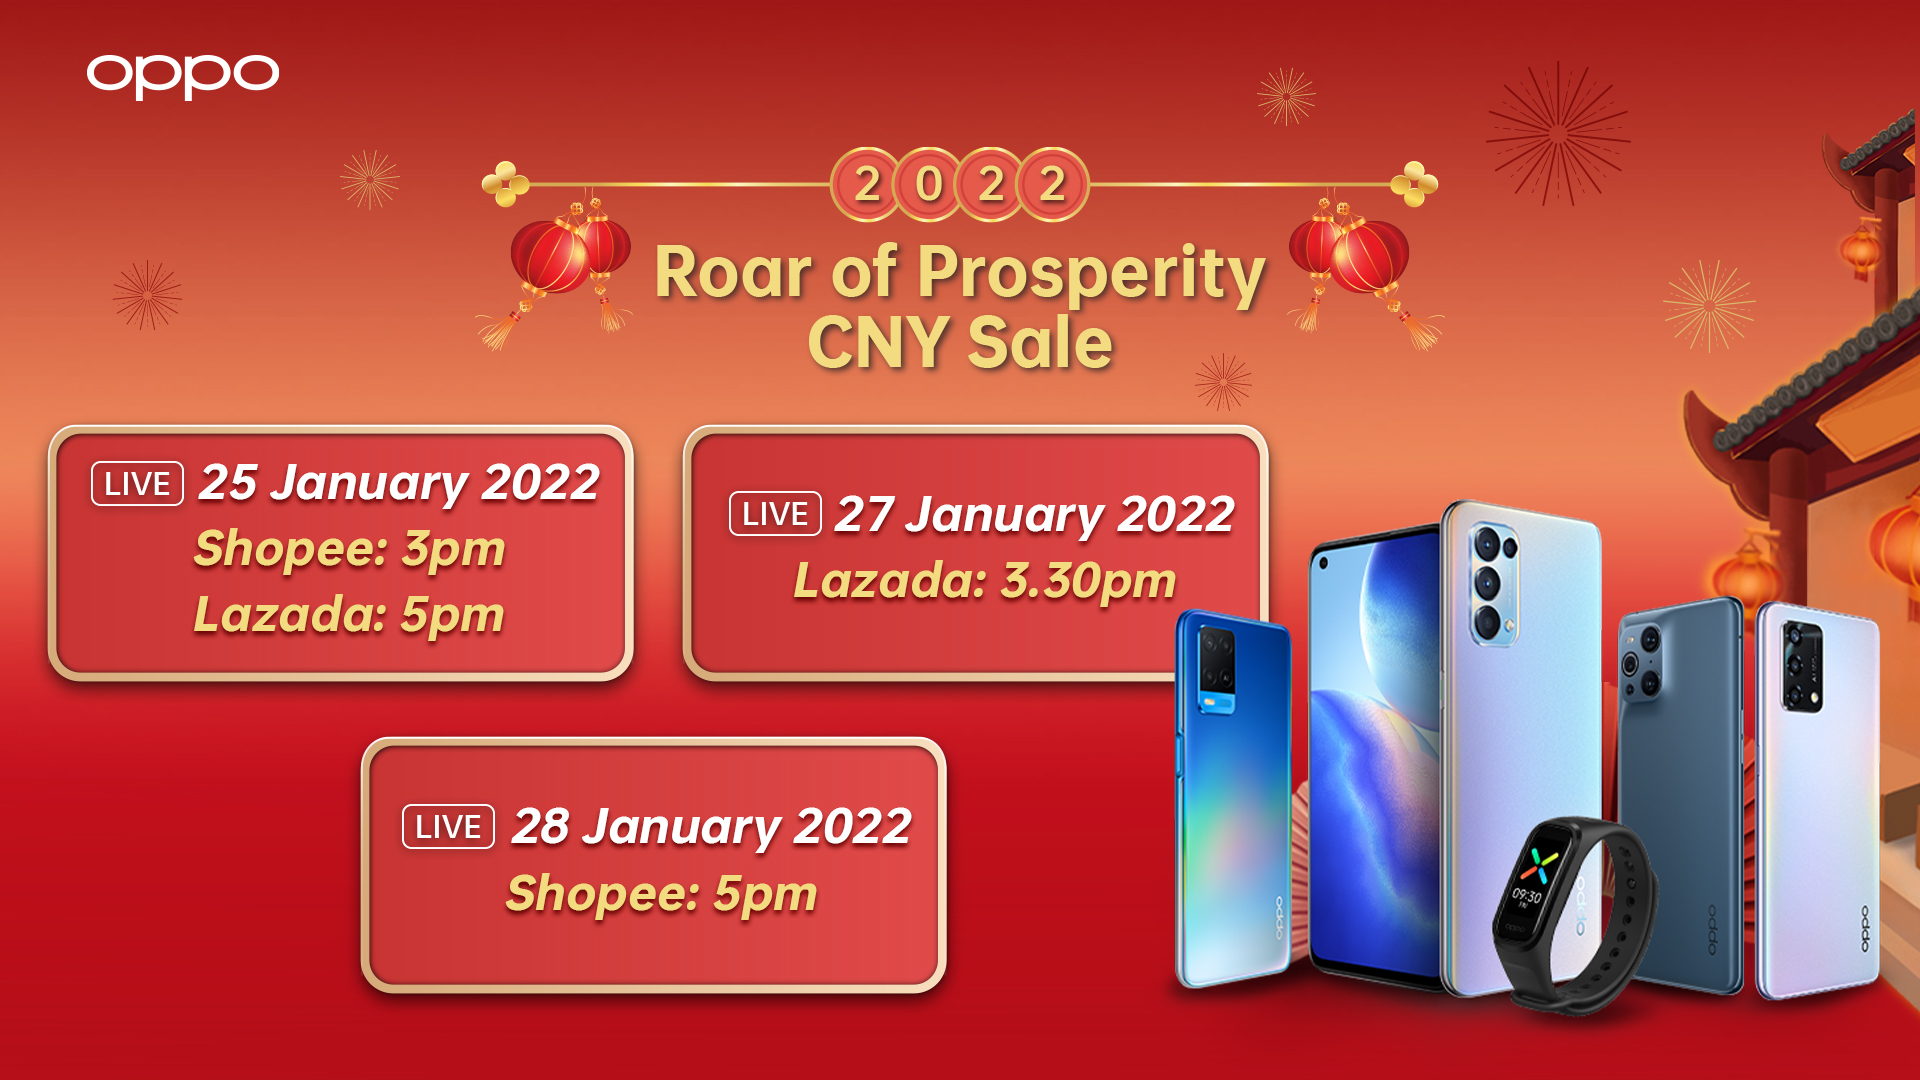 Pic 2 Roar of Prosperity CNY Sale Live Stream on Shopee and Lazada